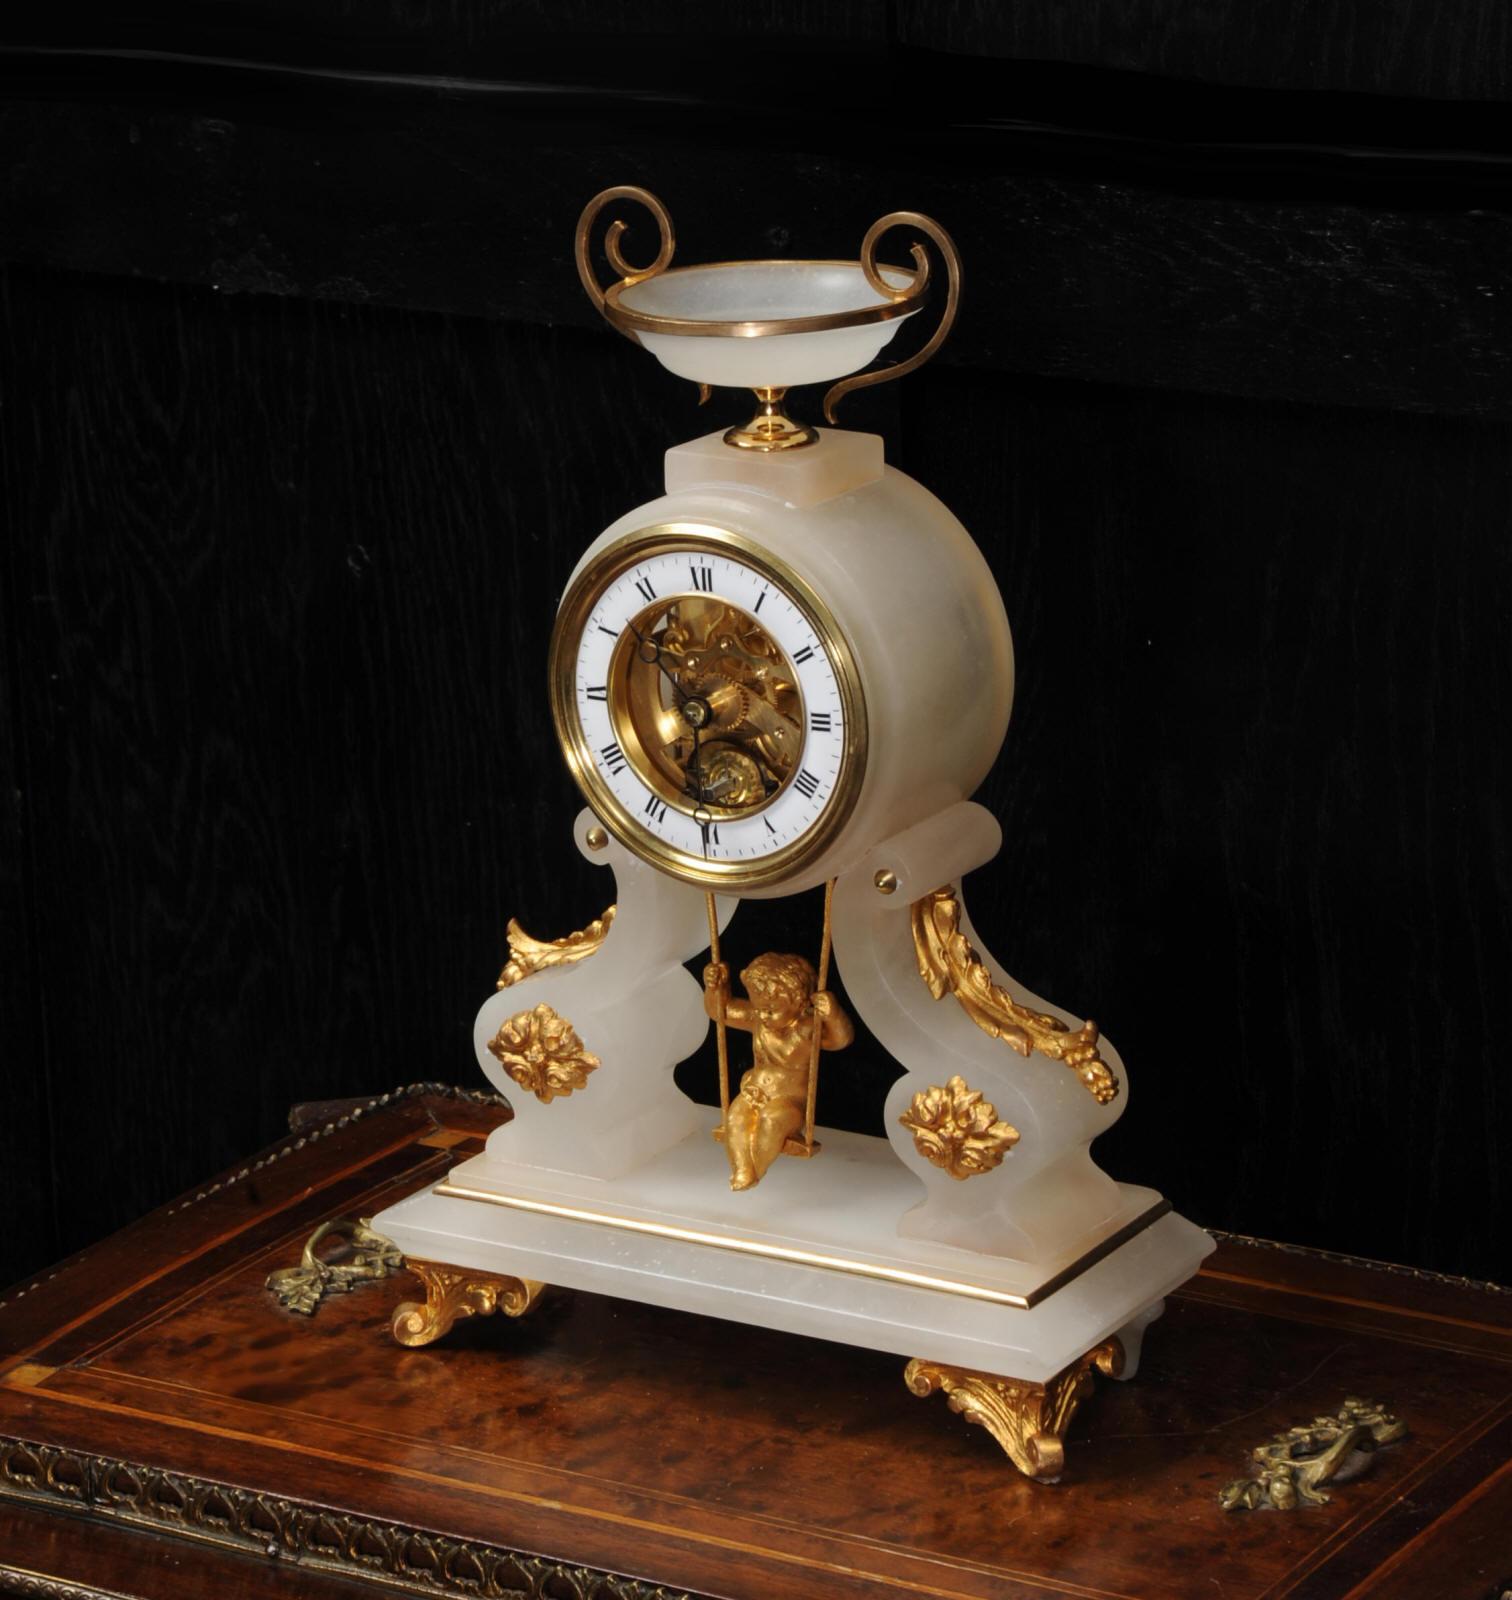 A super, rare original antique French clock featuring a cherub swinging back and forth as the pendulum, circa 1870. It uses a single escape wheel with pin-pallets acting at 90 degrees to achieve the back and forth swing. The beauty of this design is